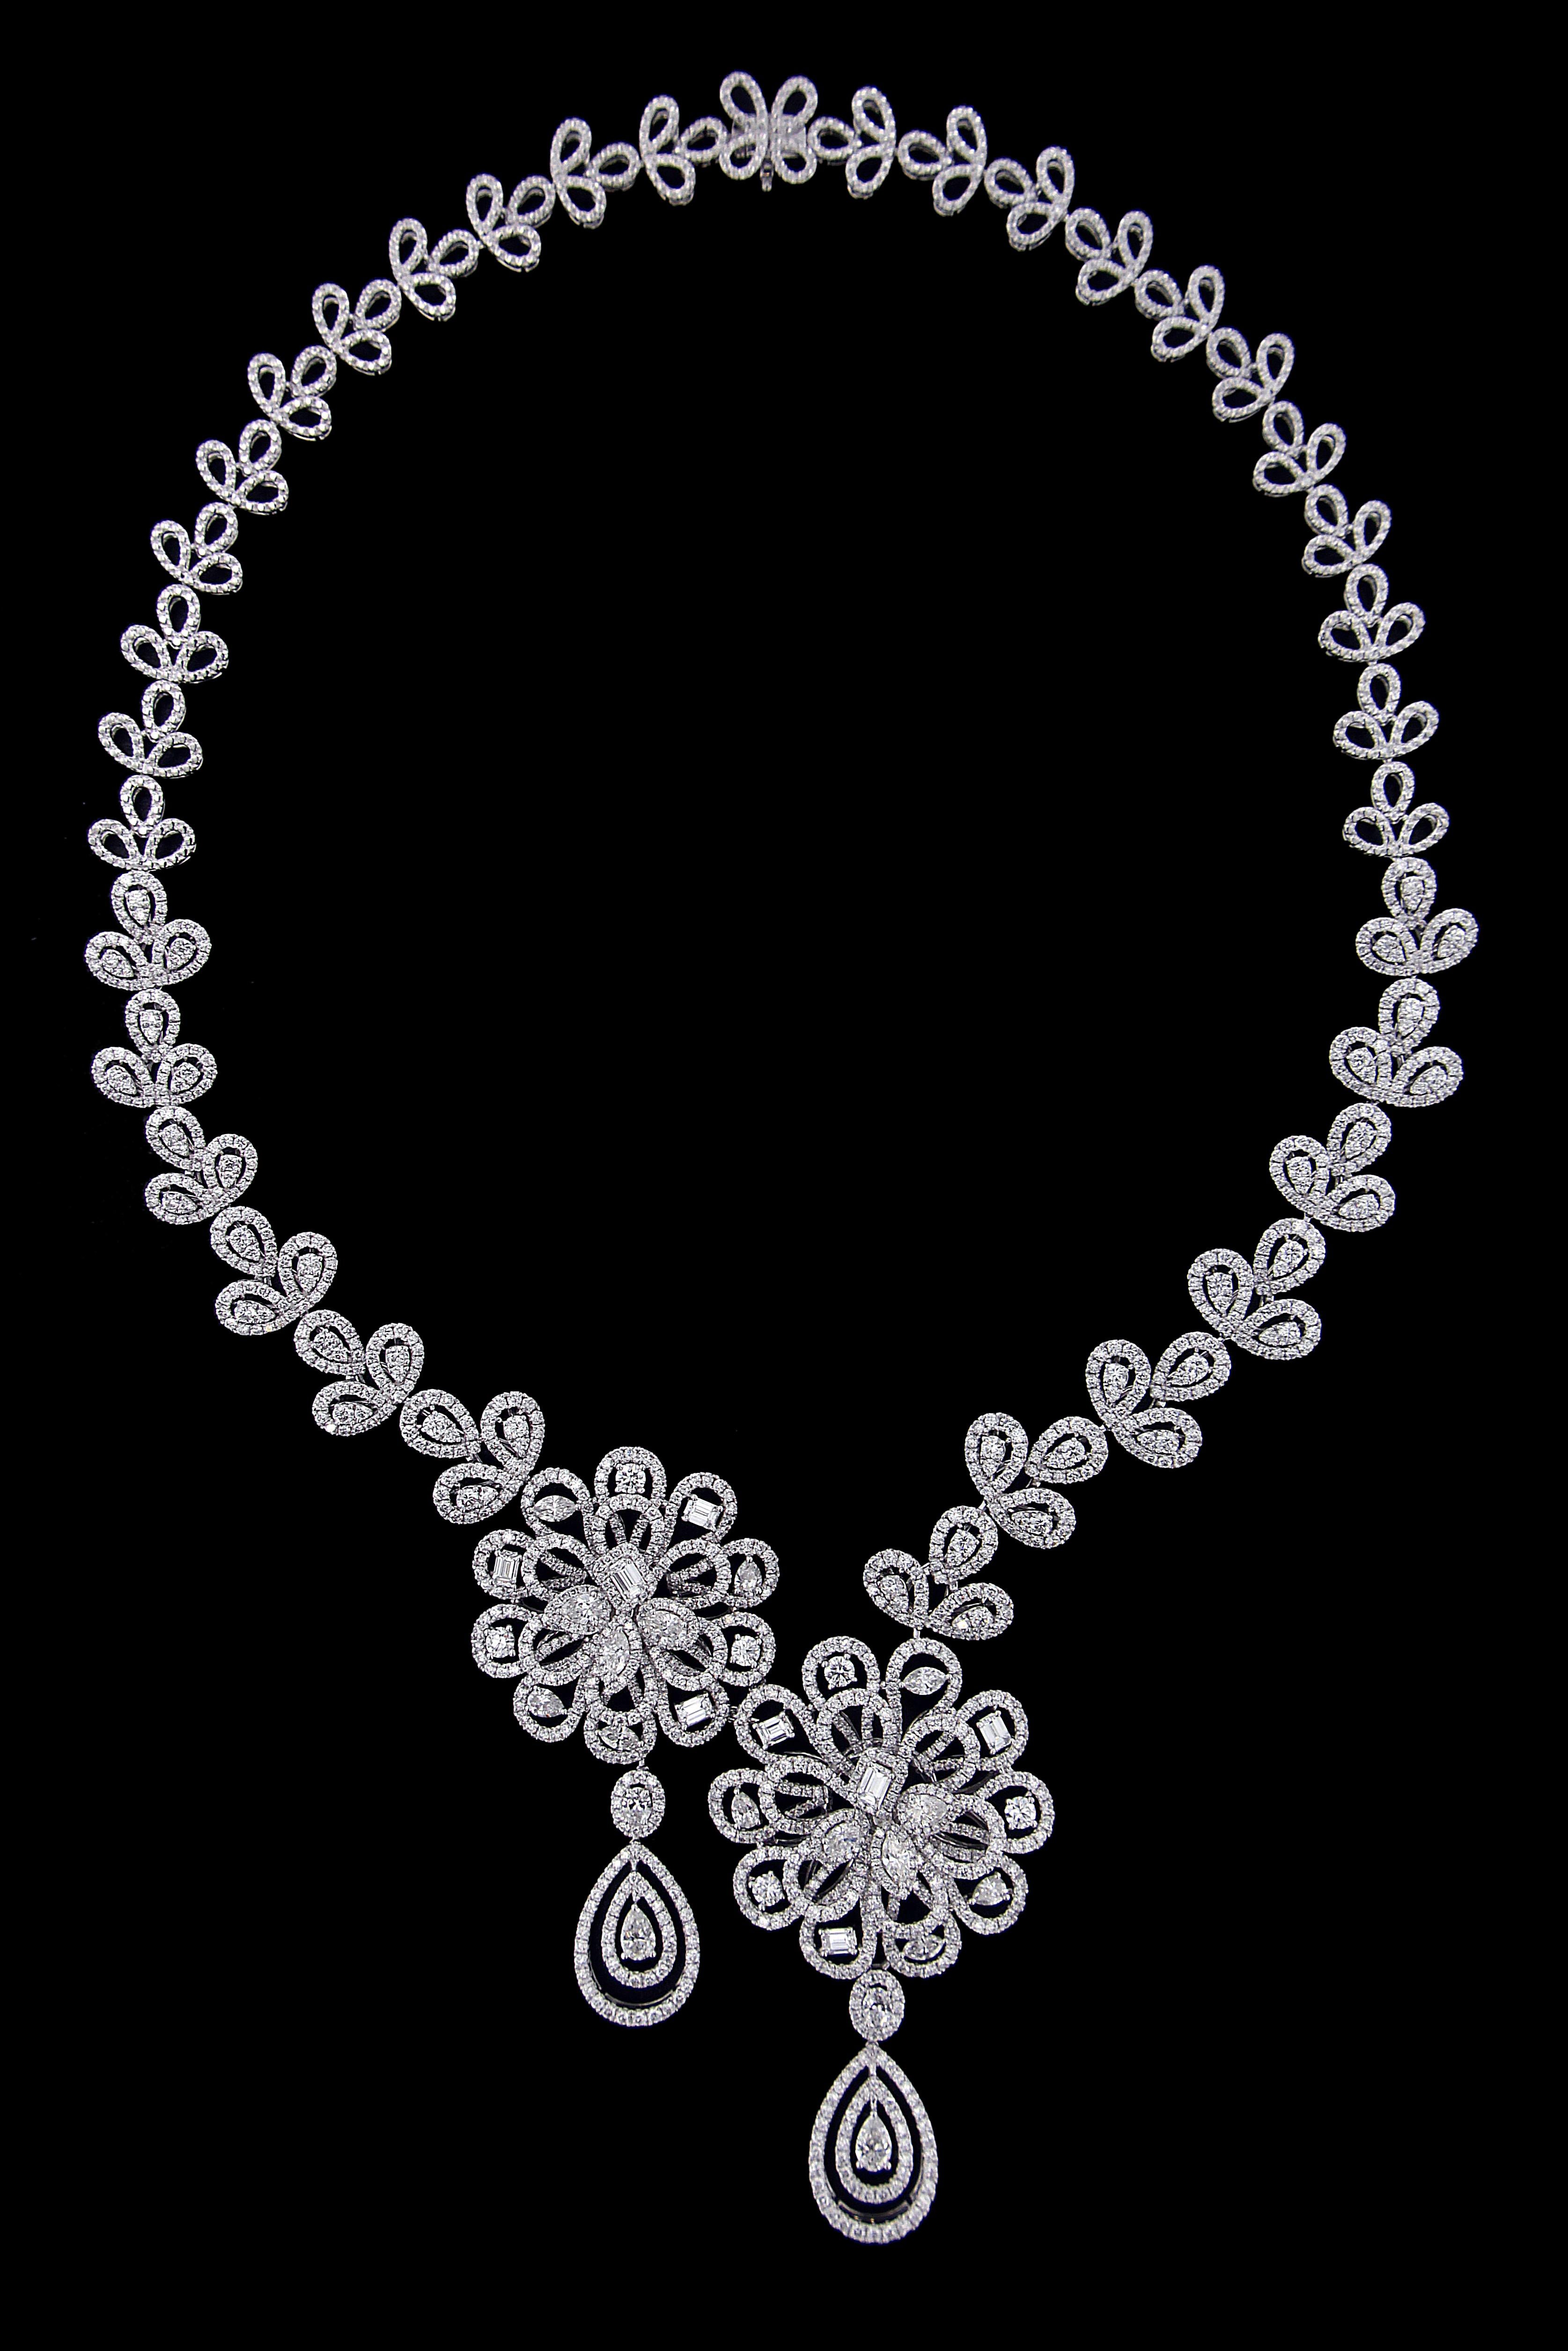 Gorgeous 18 Karat Gold And Diamonds Theme Party Set.
Necklace:
Diamonds of approximately 16.101 carats, mounted on 18 karat white gold necklace. The Necklace weighs approximately around 61.8 grams.

Please note: The charges specified do not include